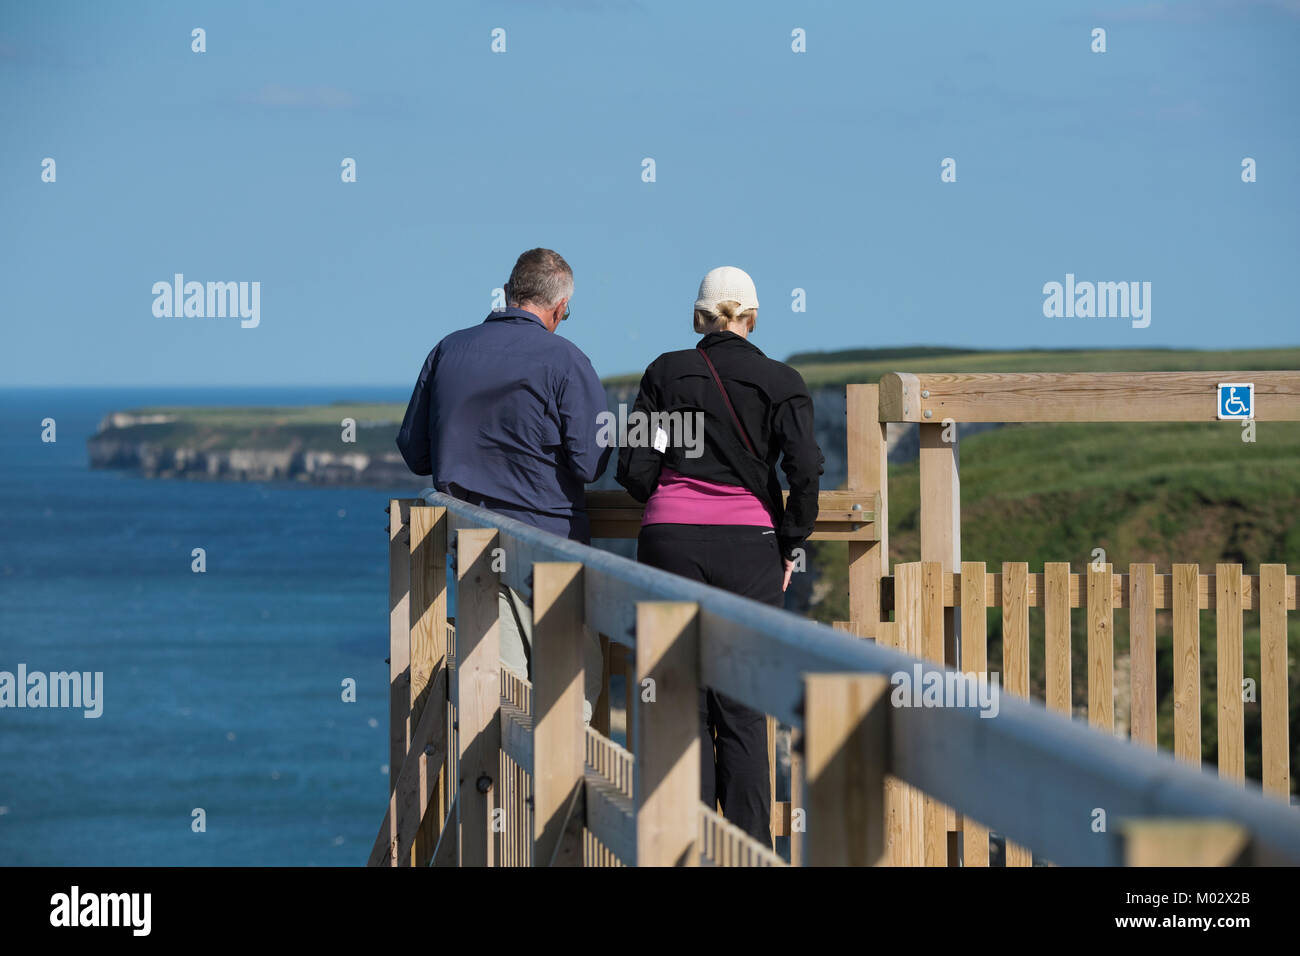 Cliff-top view for couple of people (birdwatchers) standing on viewing platform on sunny day - Bempton Cliffs RSPB reserve, East Yorkshire, England. Stock Photo